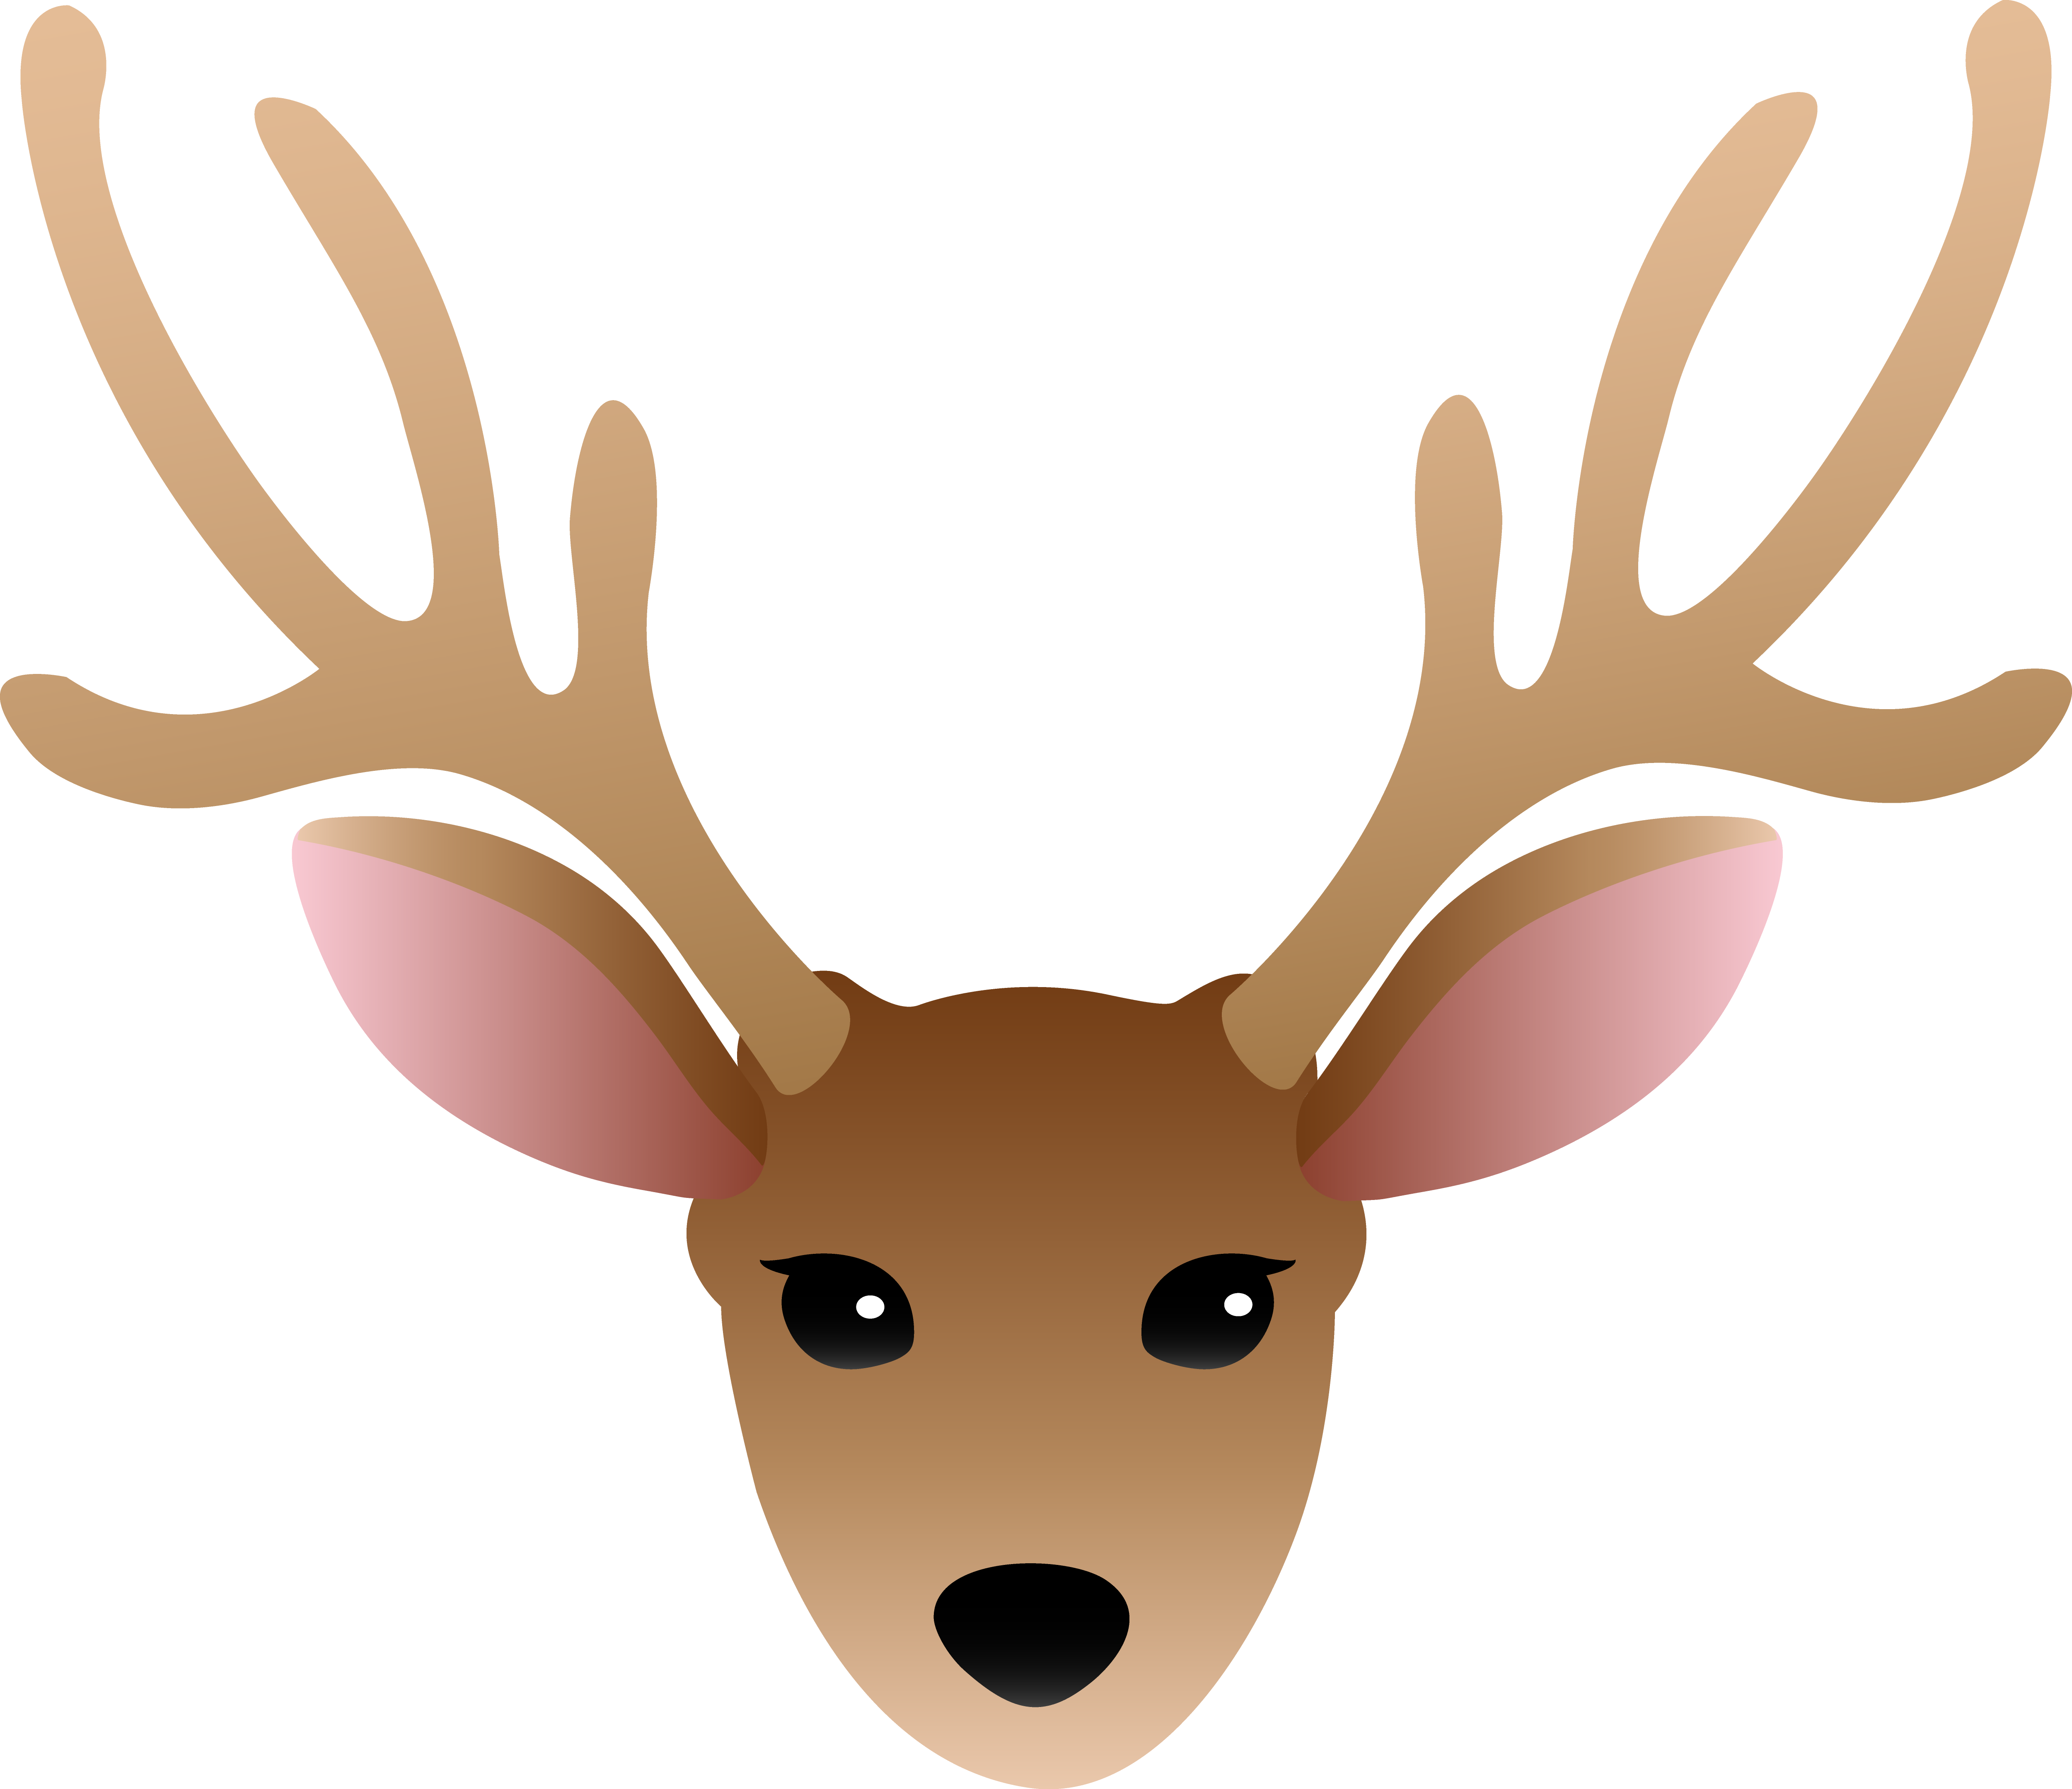 Antler clipart rudolph. Simple deer pencil and